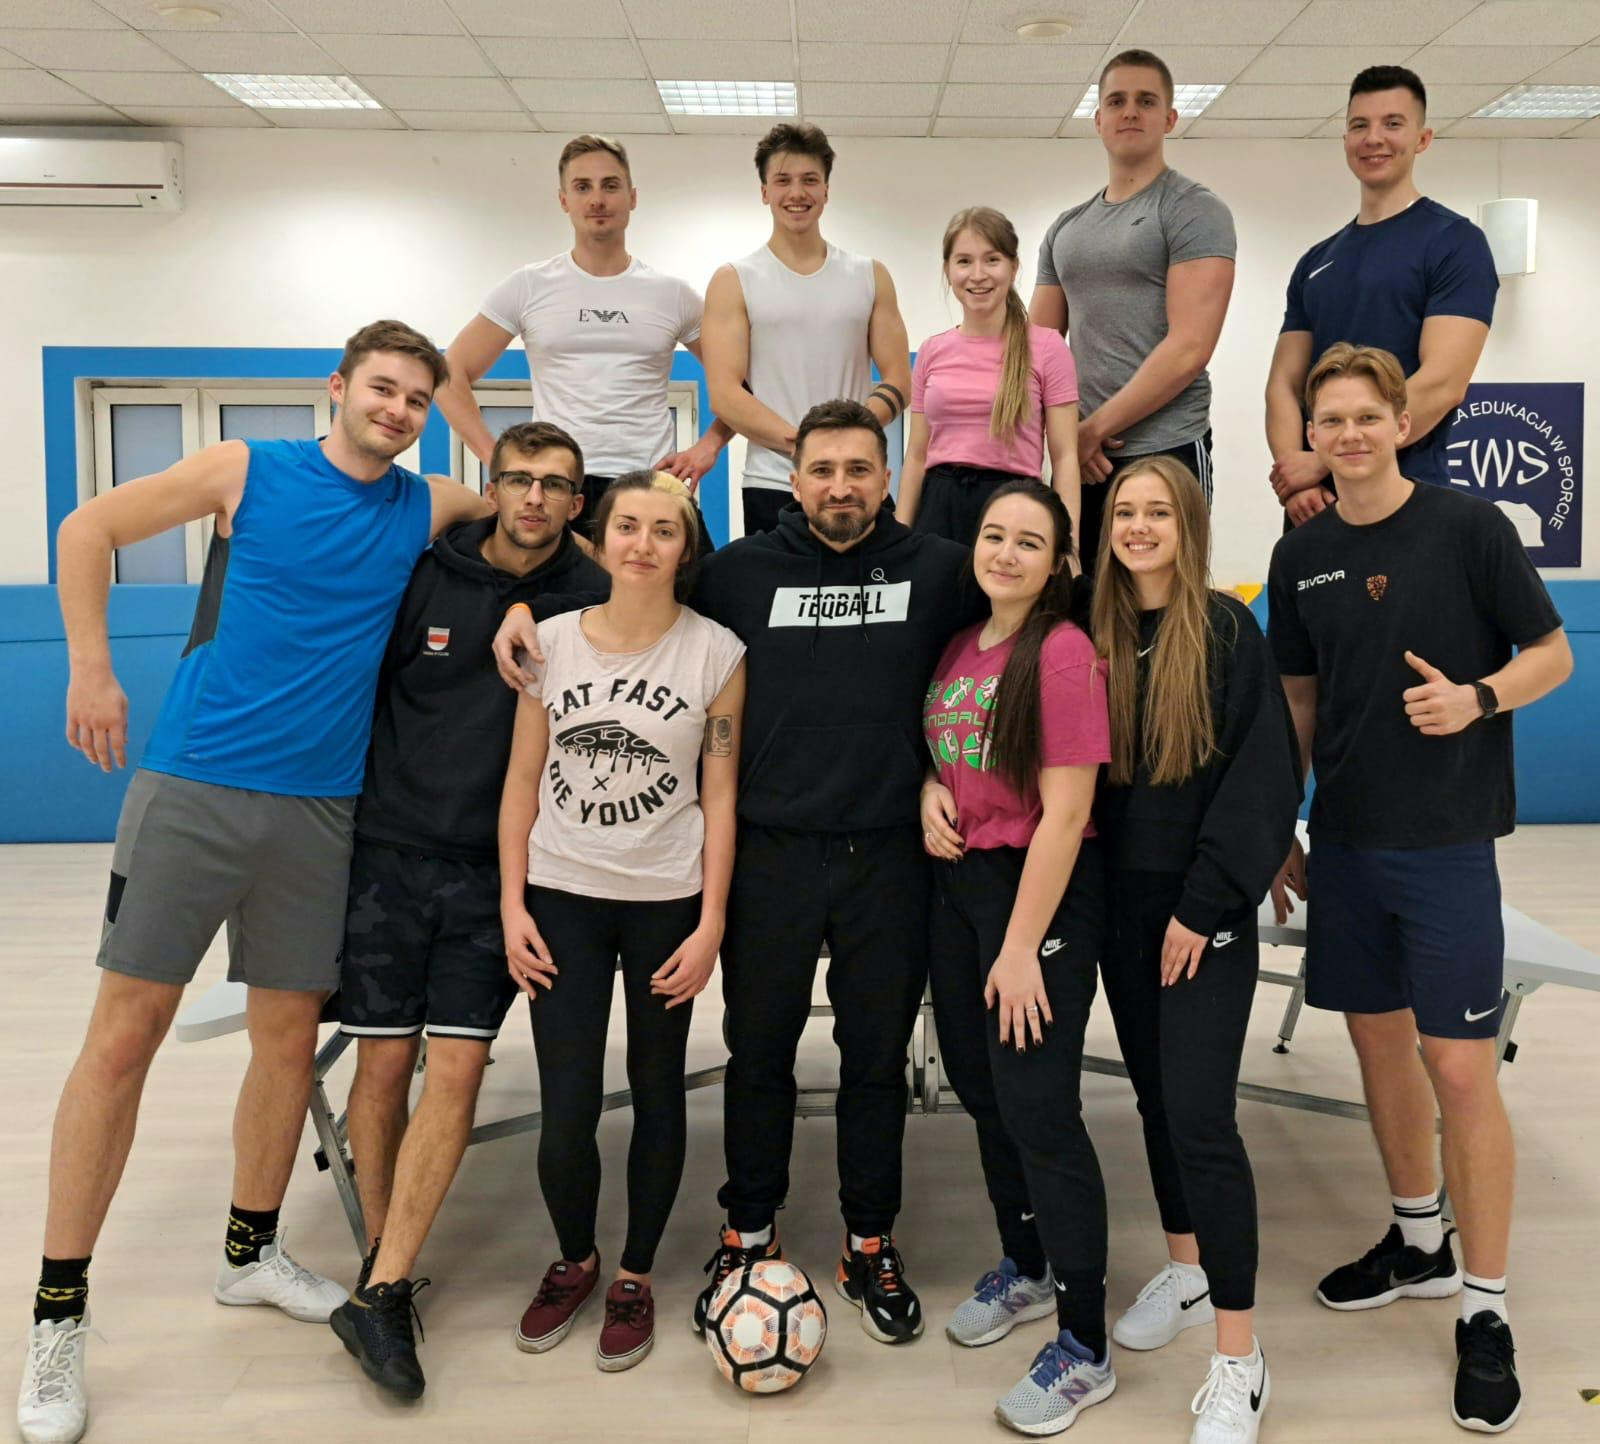 Students at the School of Education in Sport in Warsaw are set to have access to teqball training sessions through the PZTEQ partnership ©FITEQ